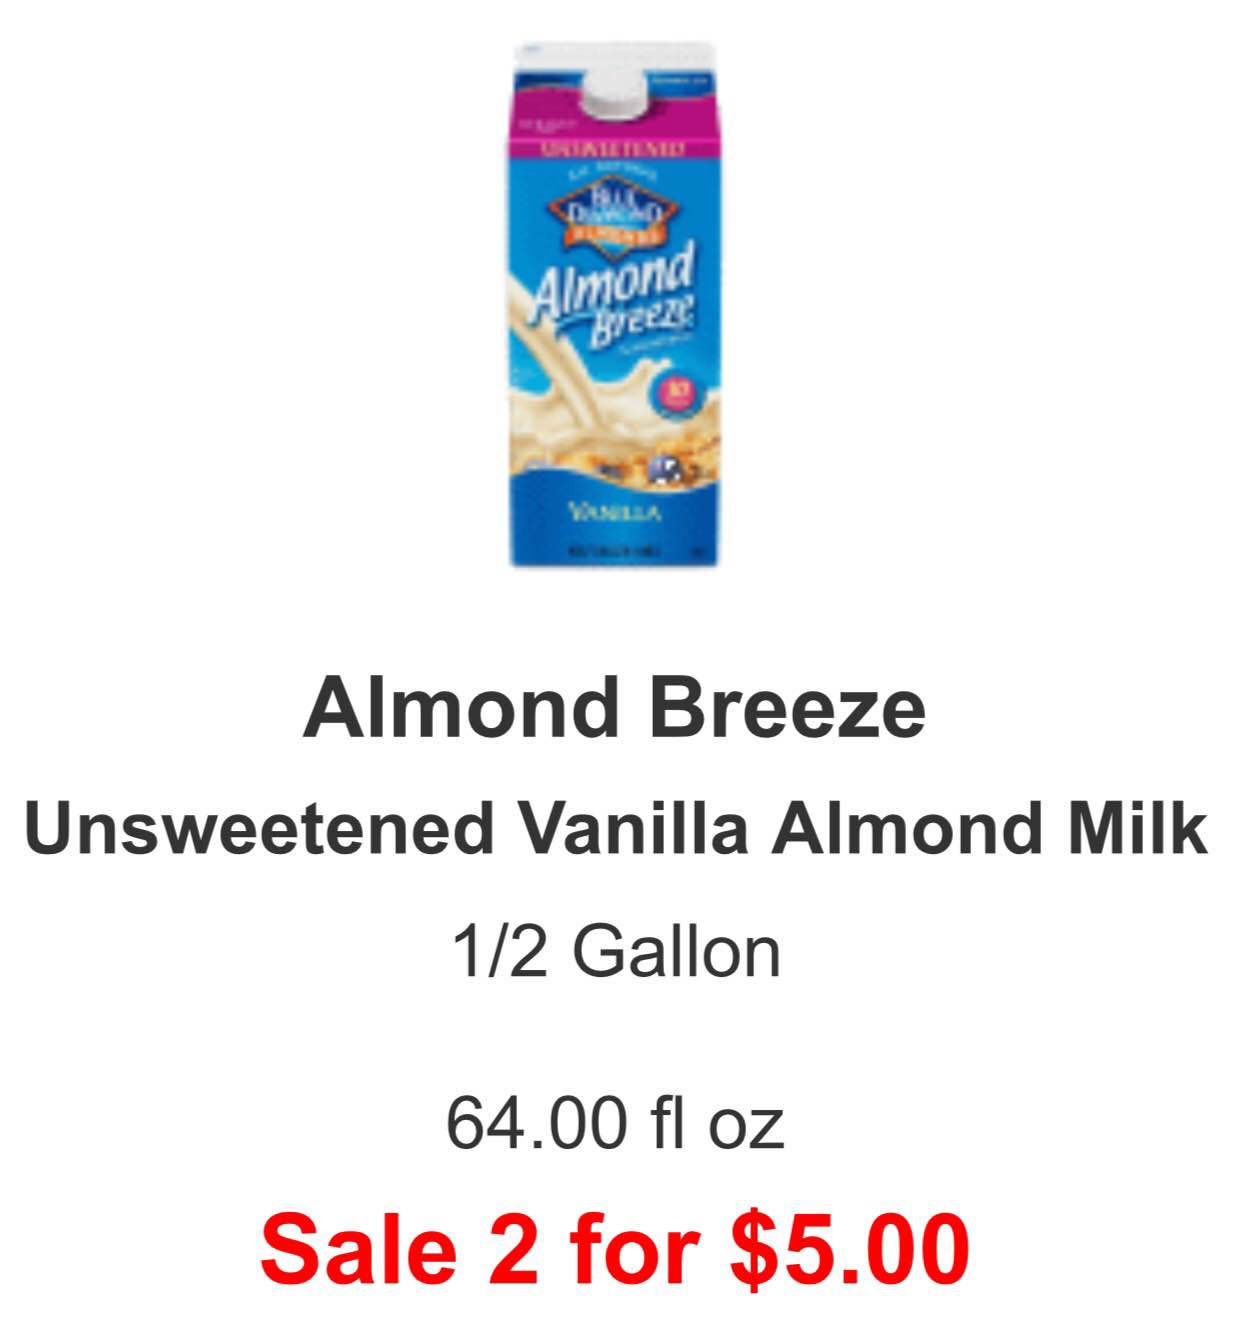 almond-breeze-almond-milk-just-0-50-at-farm-fresh-the-coupon-challenge